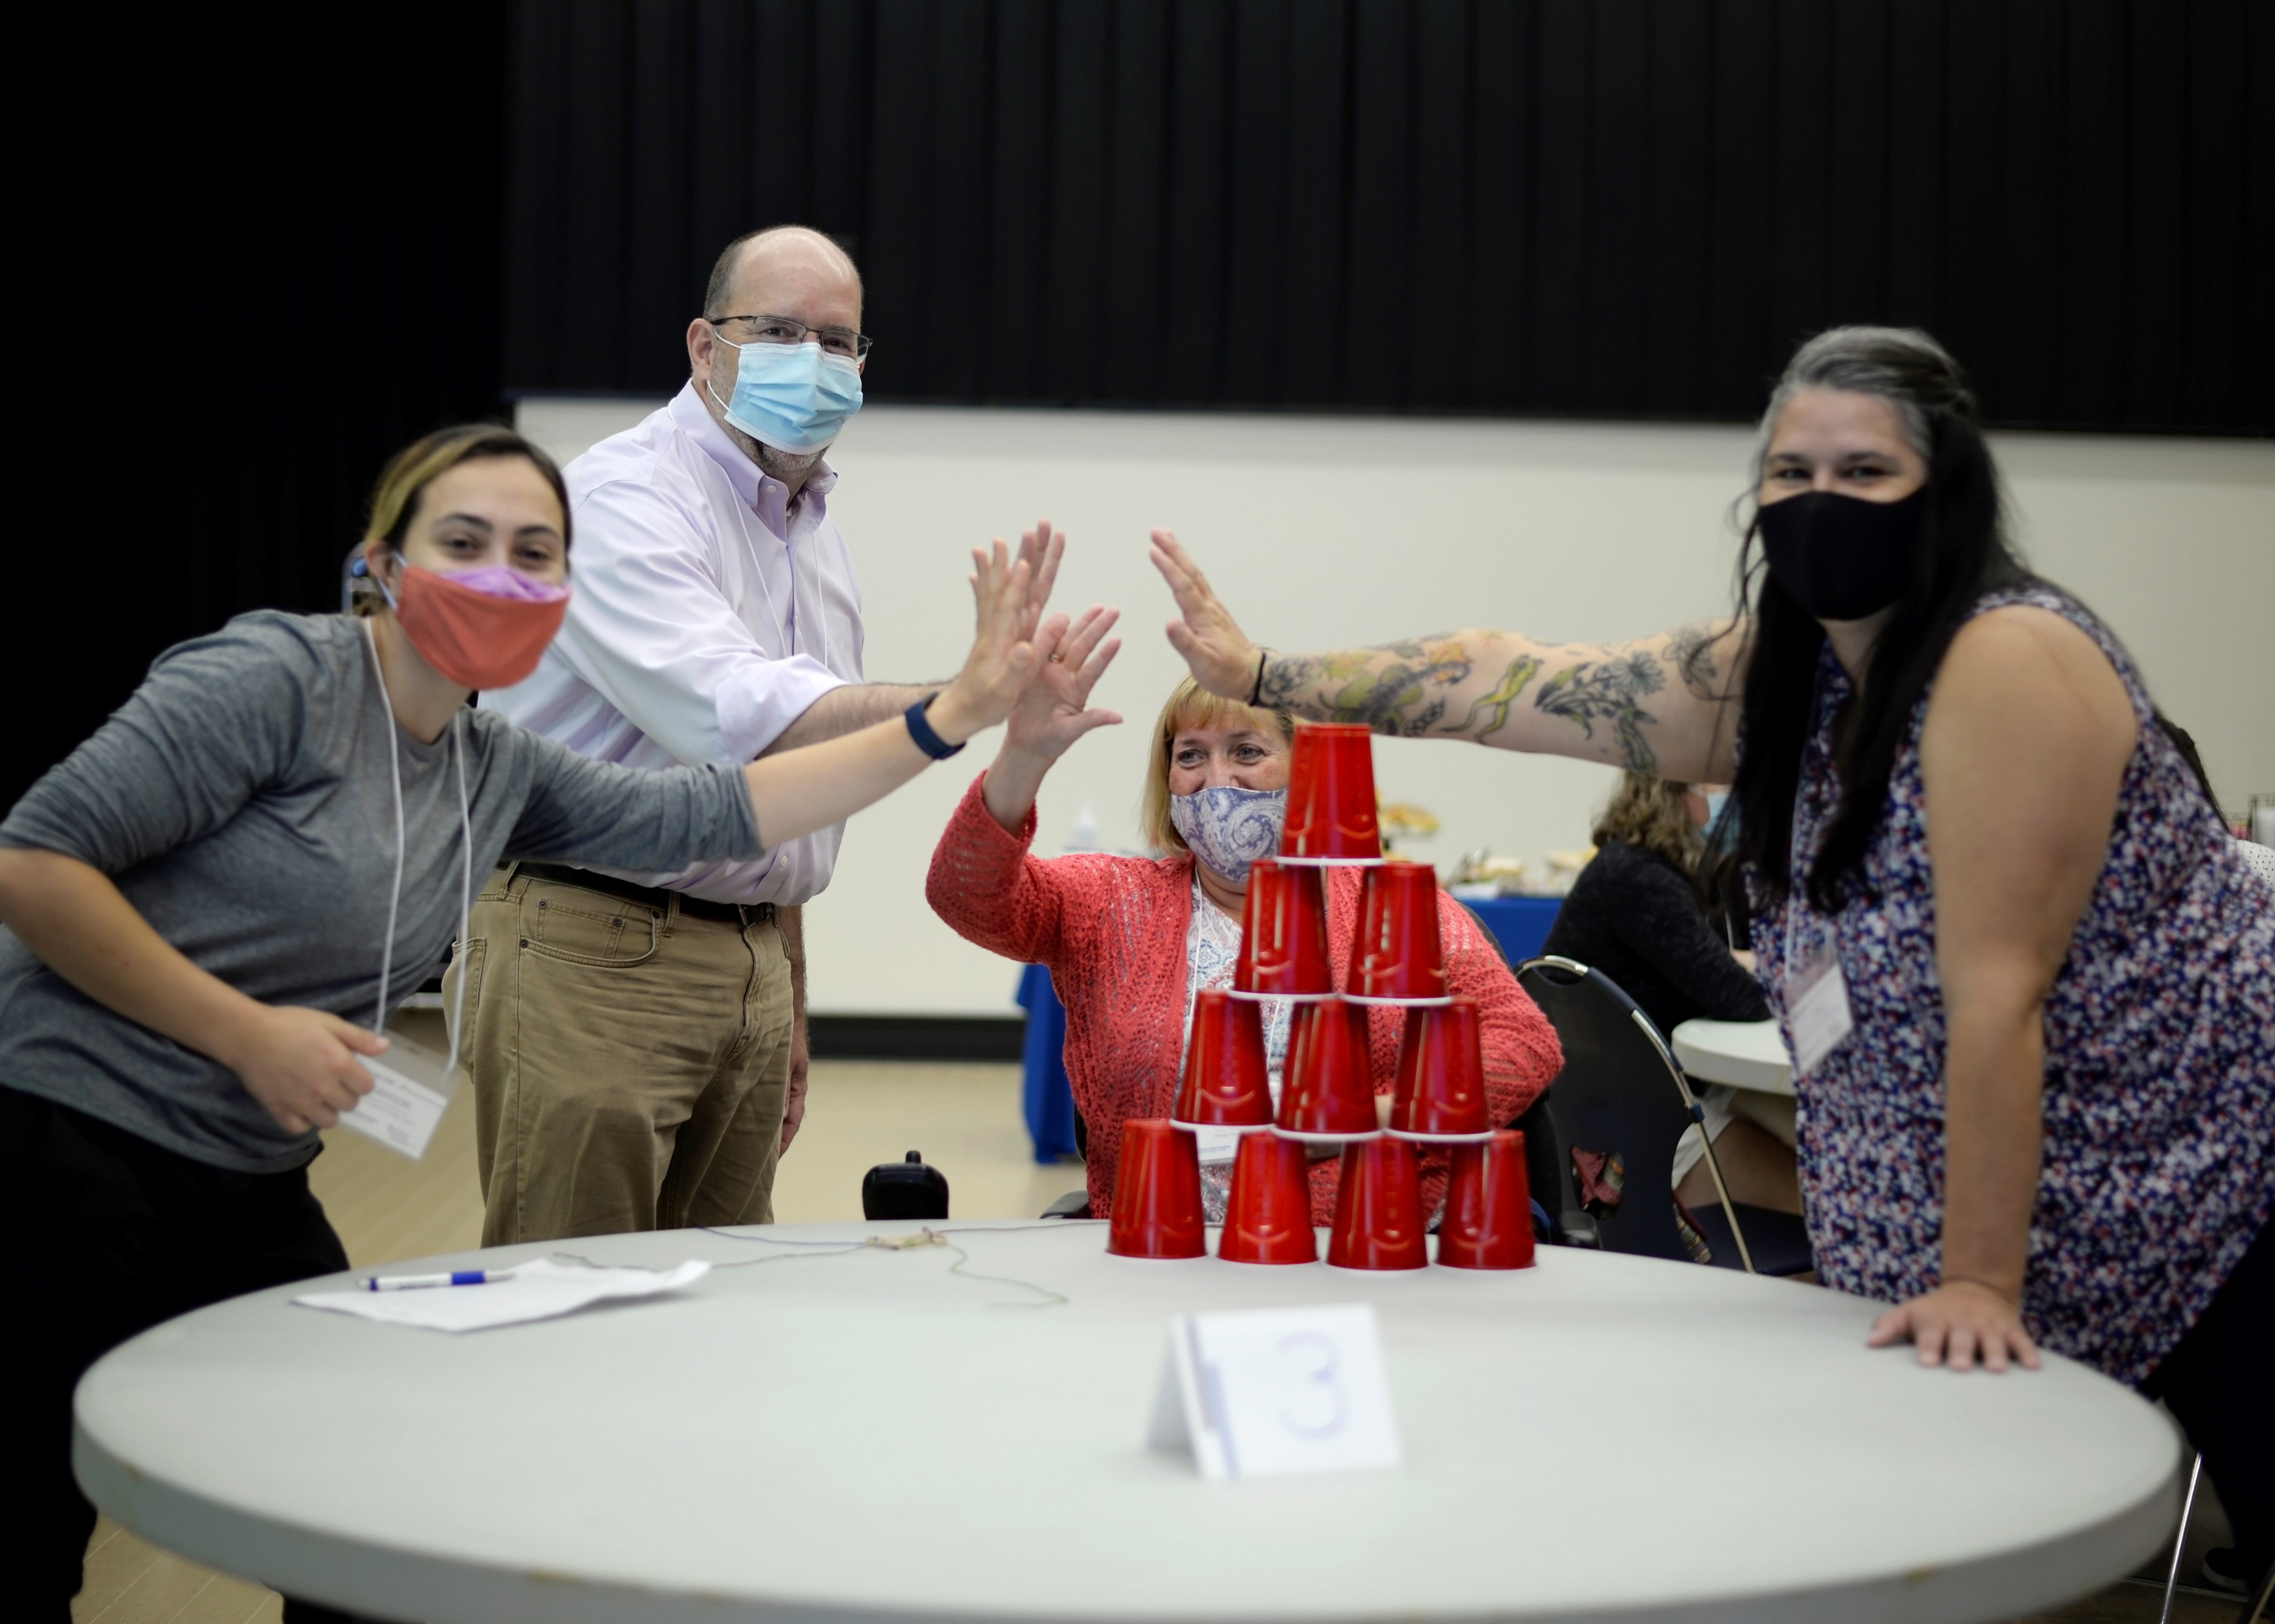 a meet and greet photo of 4 LEND faculty and staff, all wearing masks and high fiving